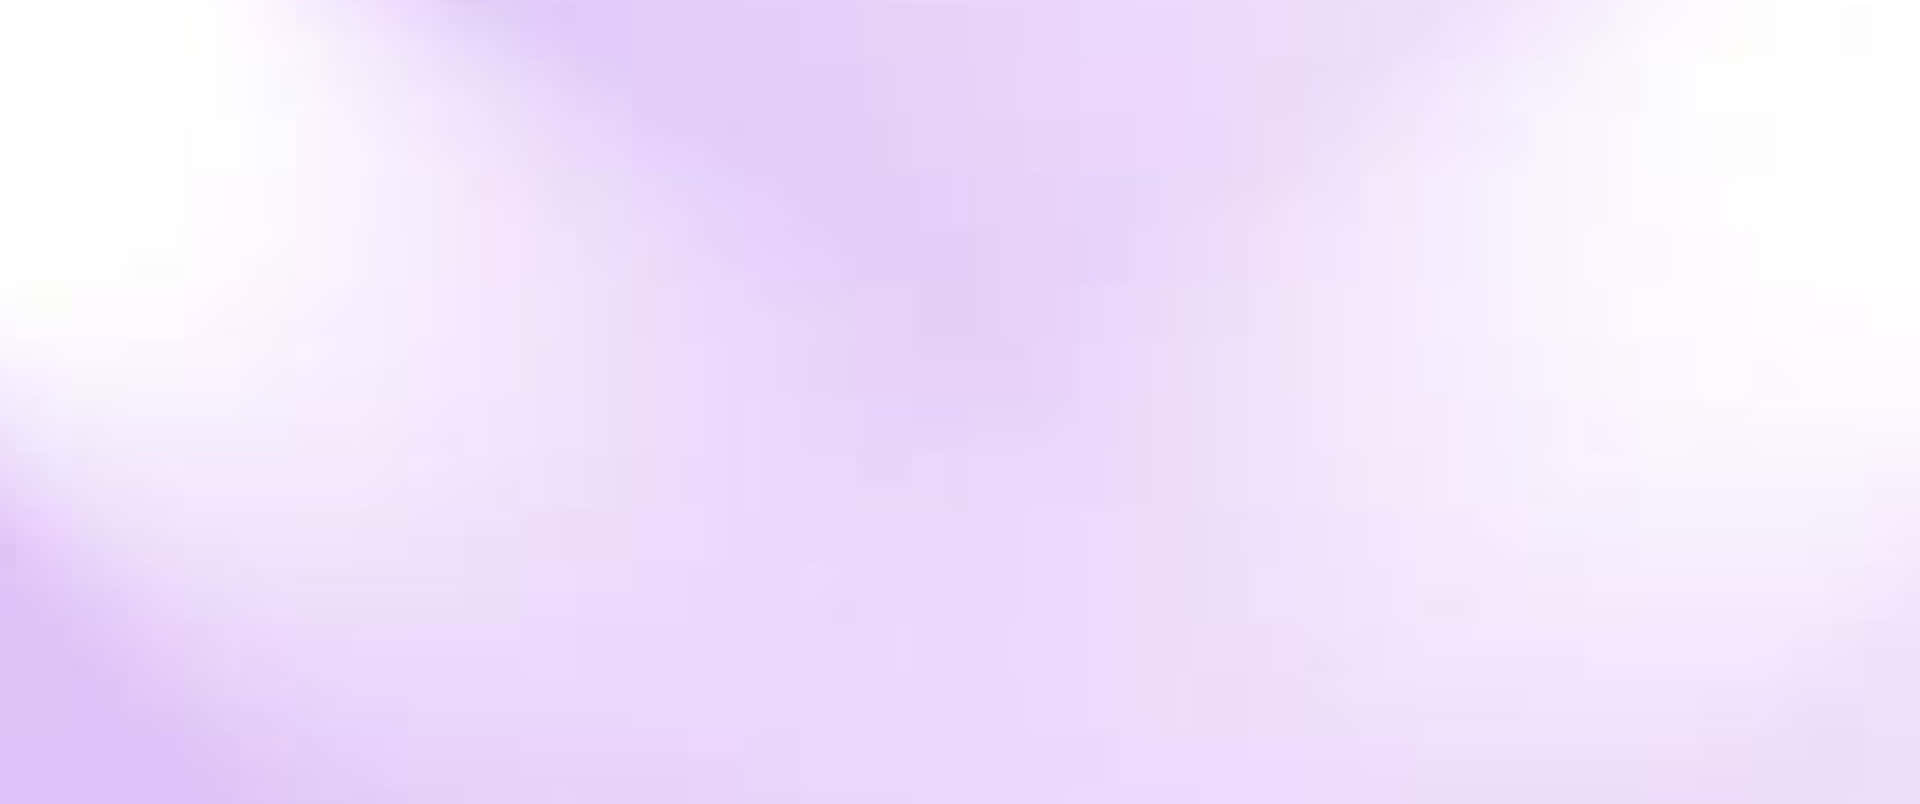 Abstract purple and white background